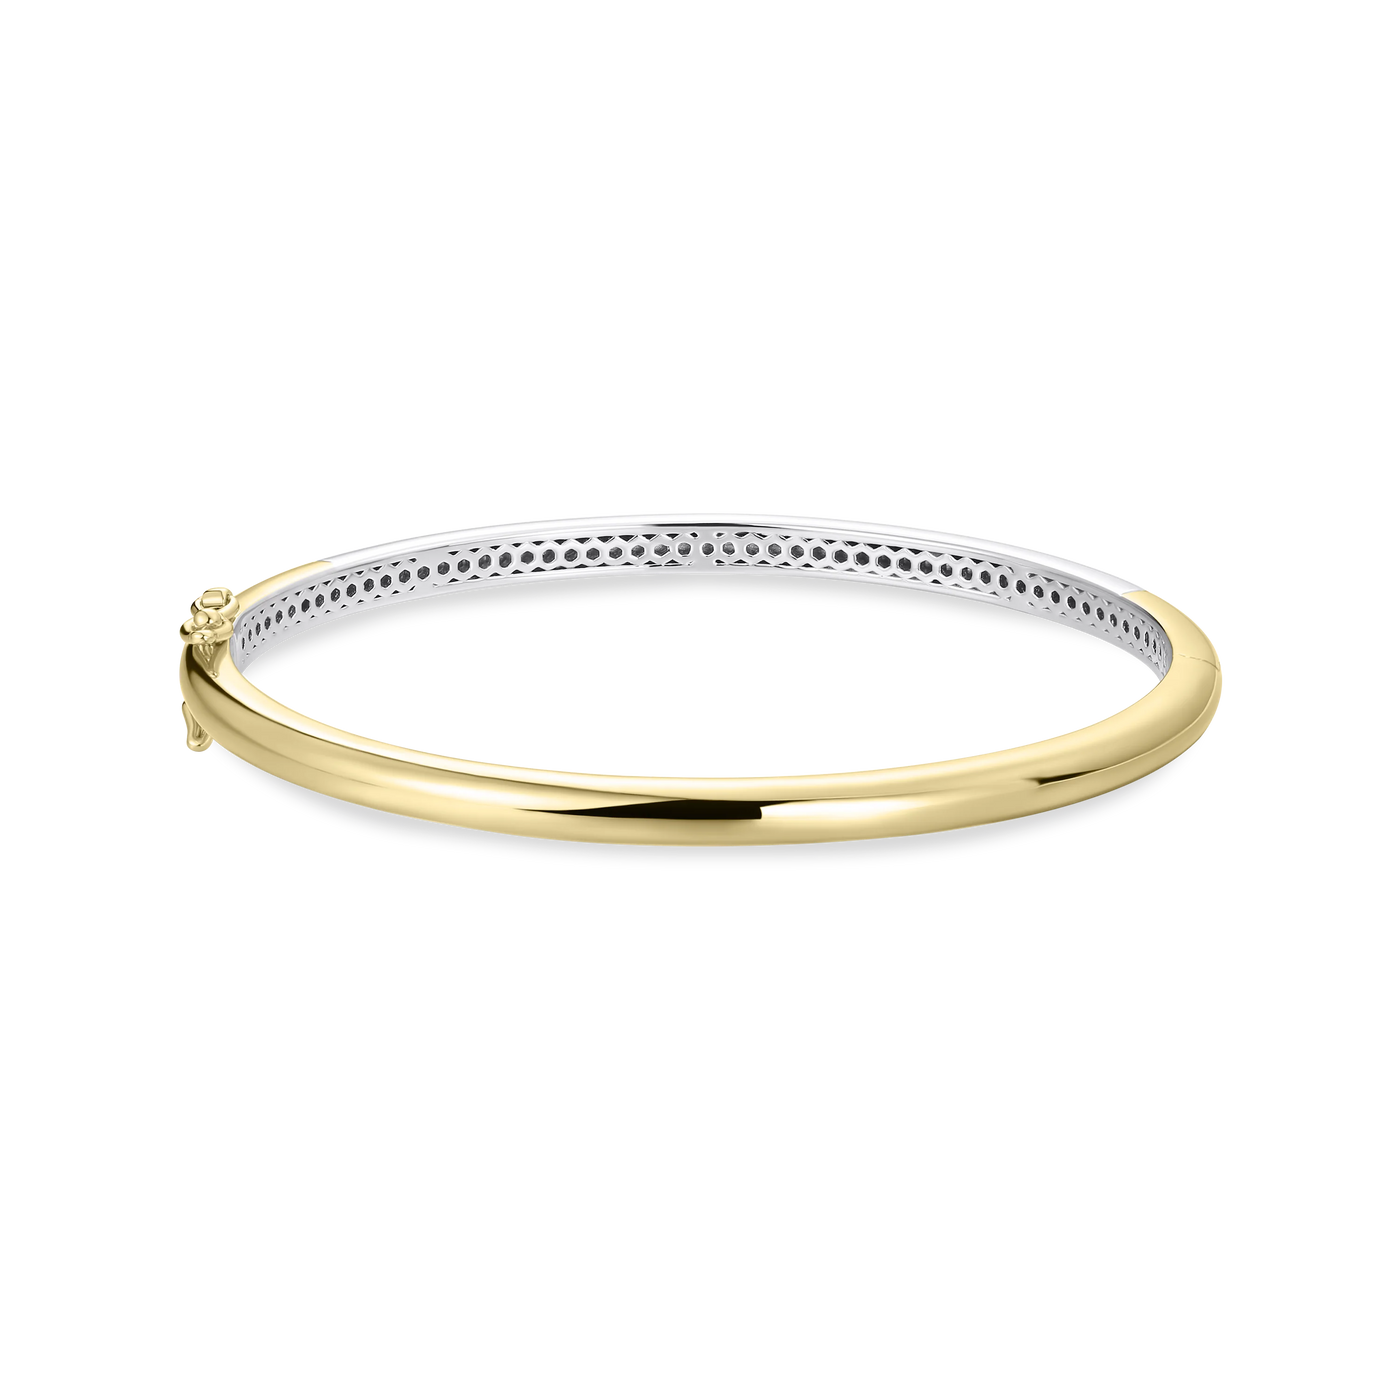 Gisser Sterling Silver Bangle - Silver & Gold Plated Silver